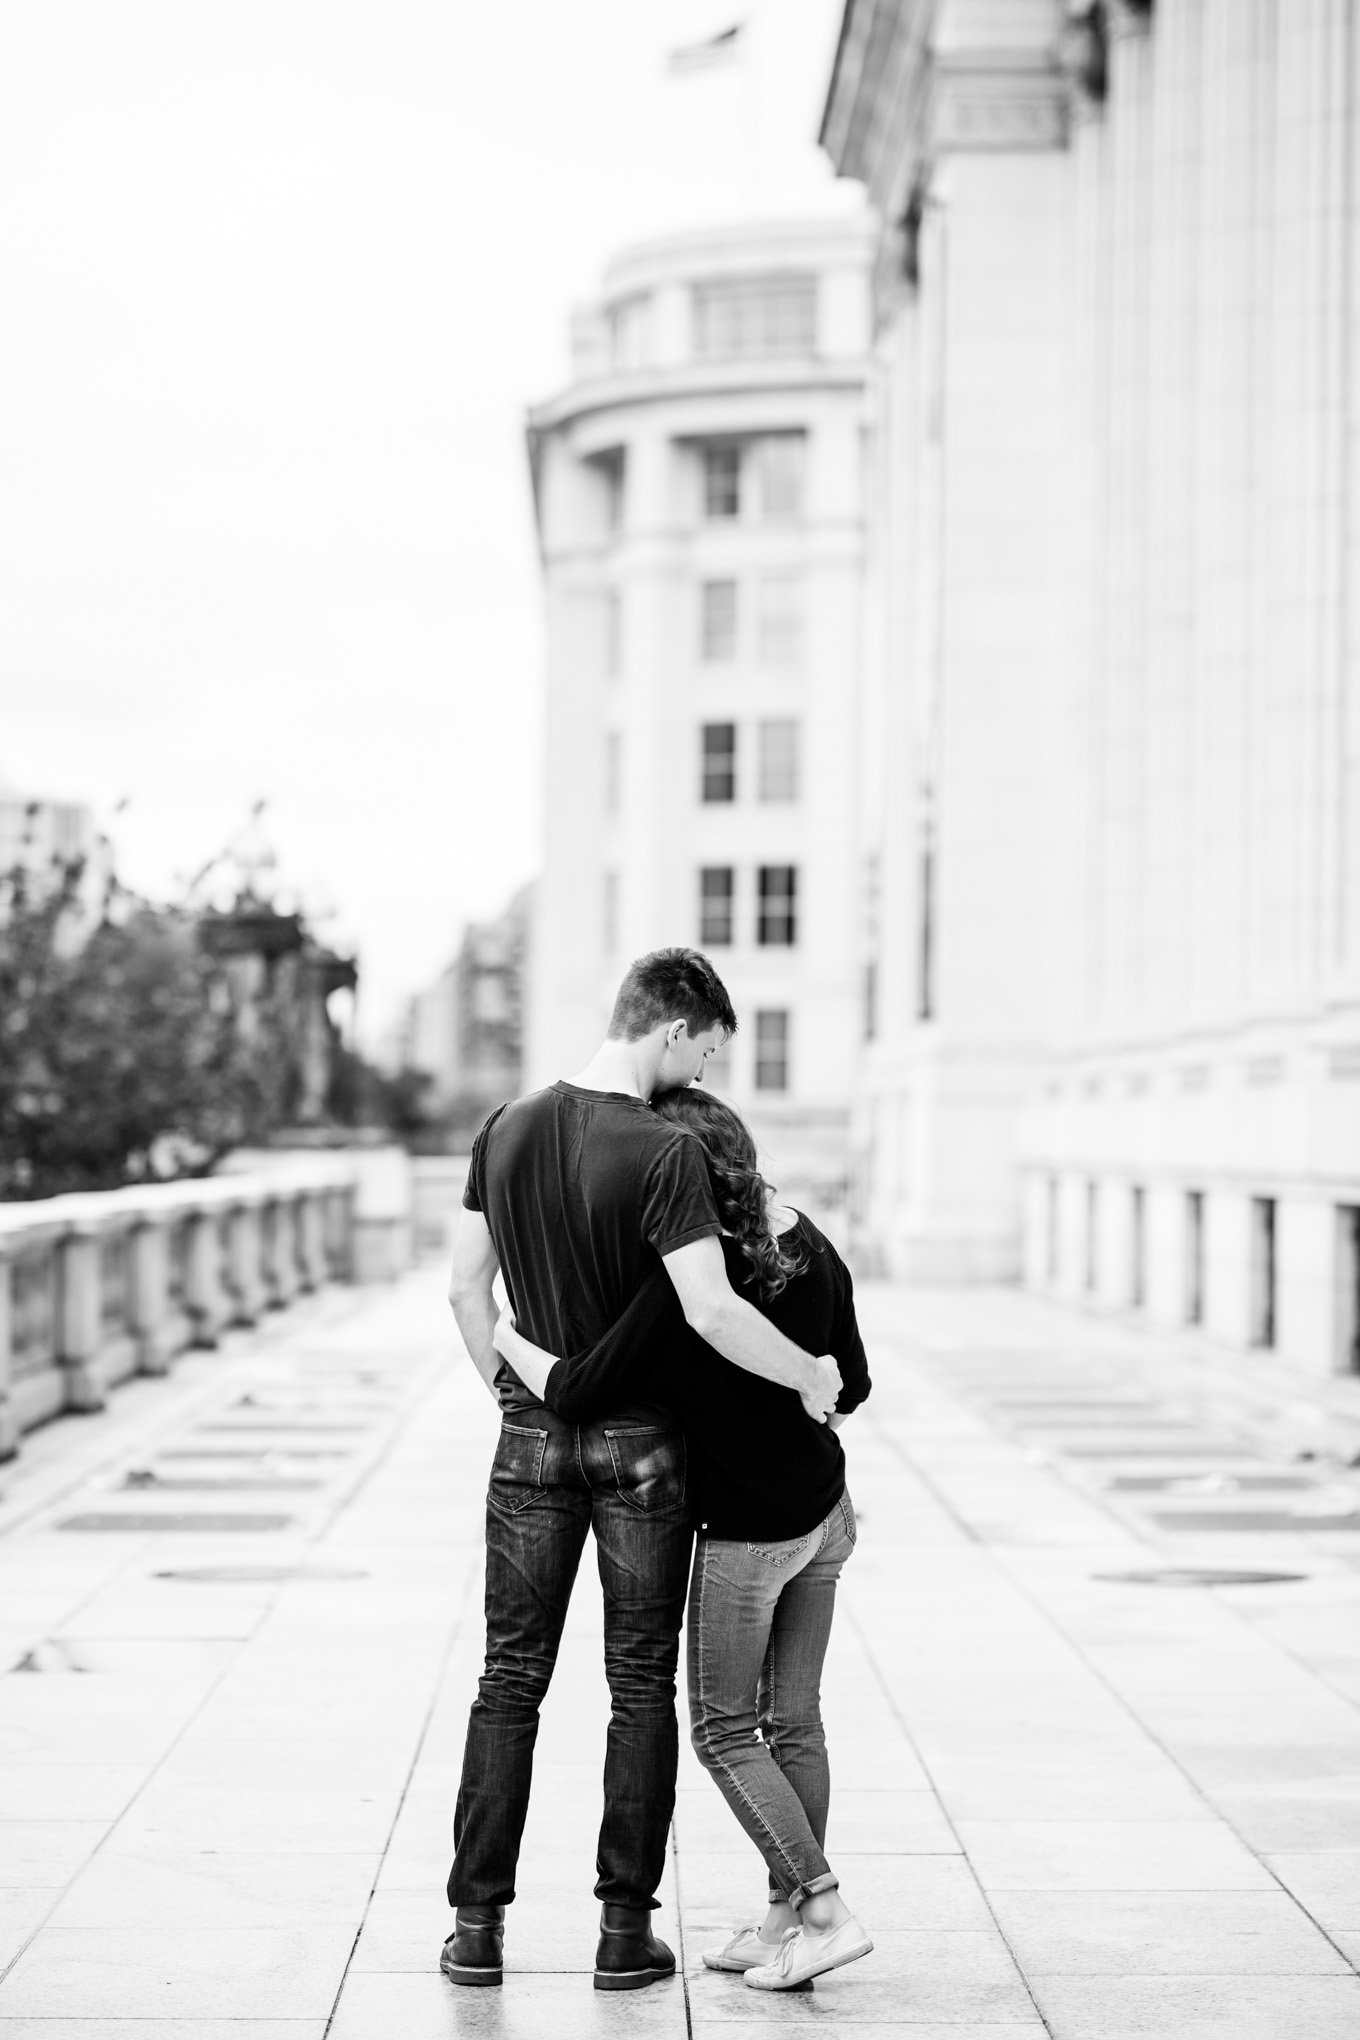 black and white engagement photos, black and white photography, black and white photos, engagement photos, black and white D.C., D.C. engagement photos, classic engagement photos, traditional engagement photos, engagement photos poses, classic architecture, D.C. architecture, Union Station D.C., Union Station, engaged couple, relationship goals, joyful couple, black and white sessions, Postal Museum, couple hugging